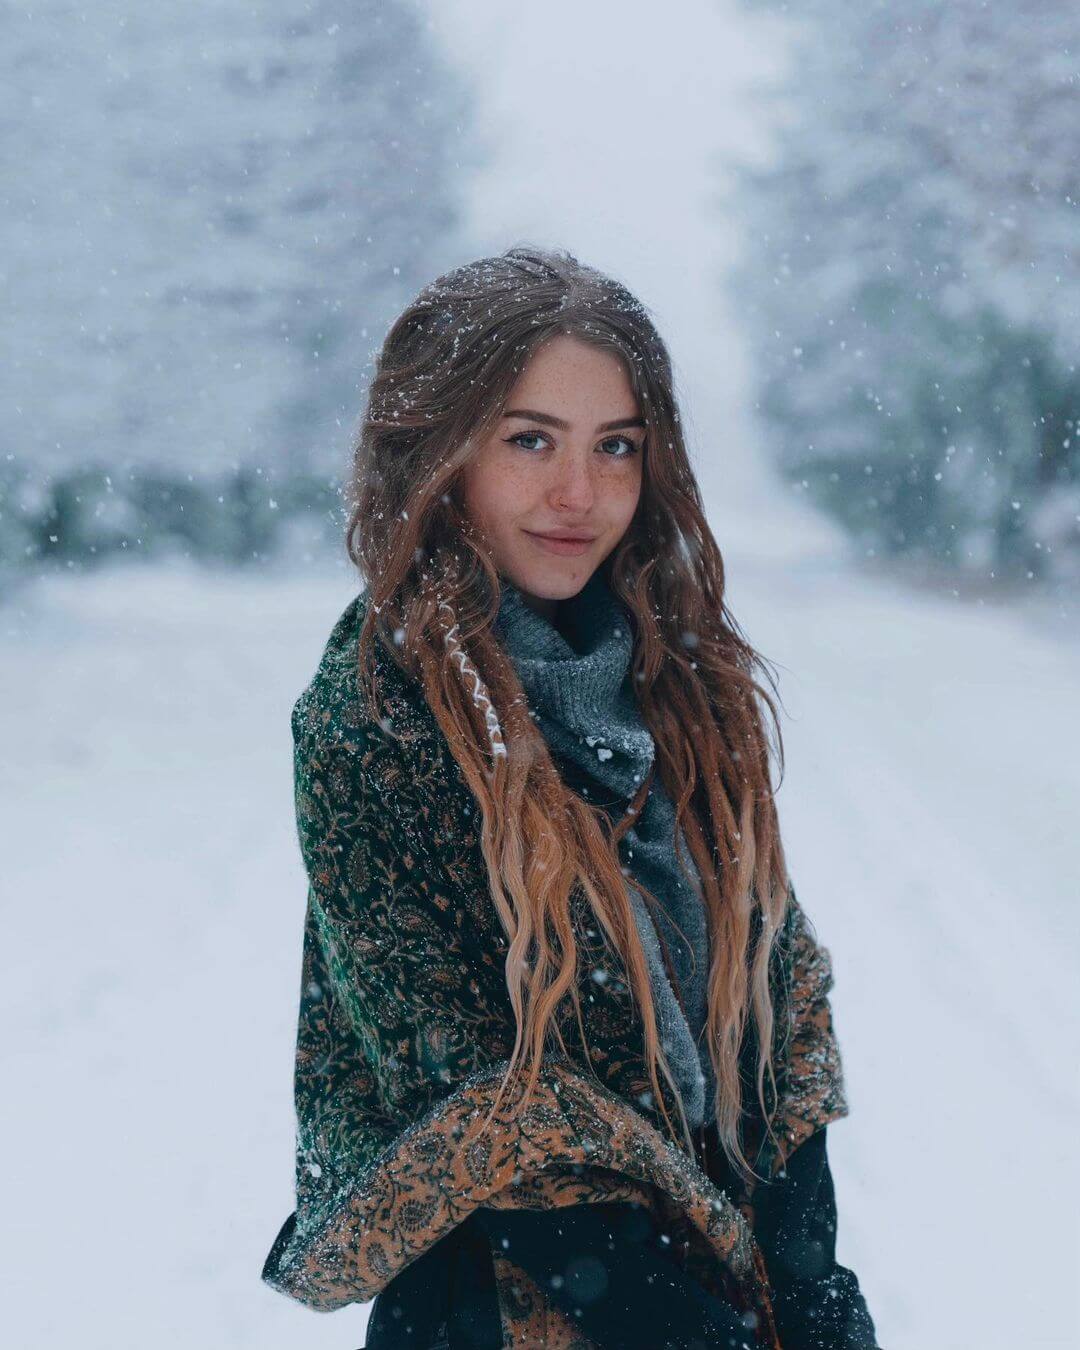 Boho Fashion for Winter – How to Stay Stylish and Warm